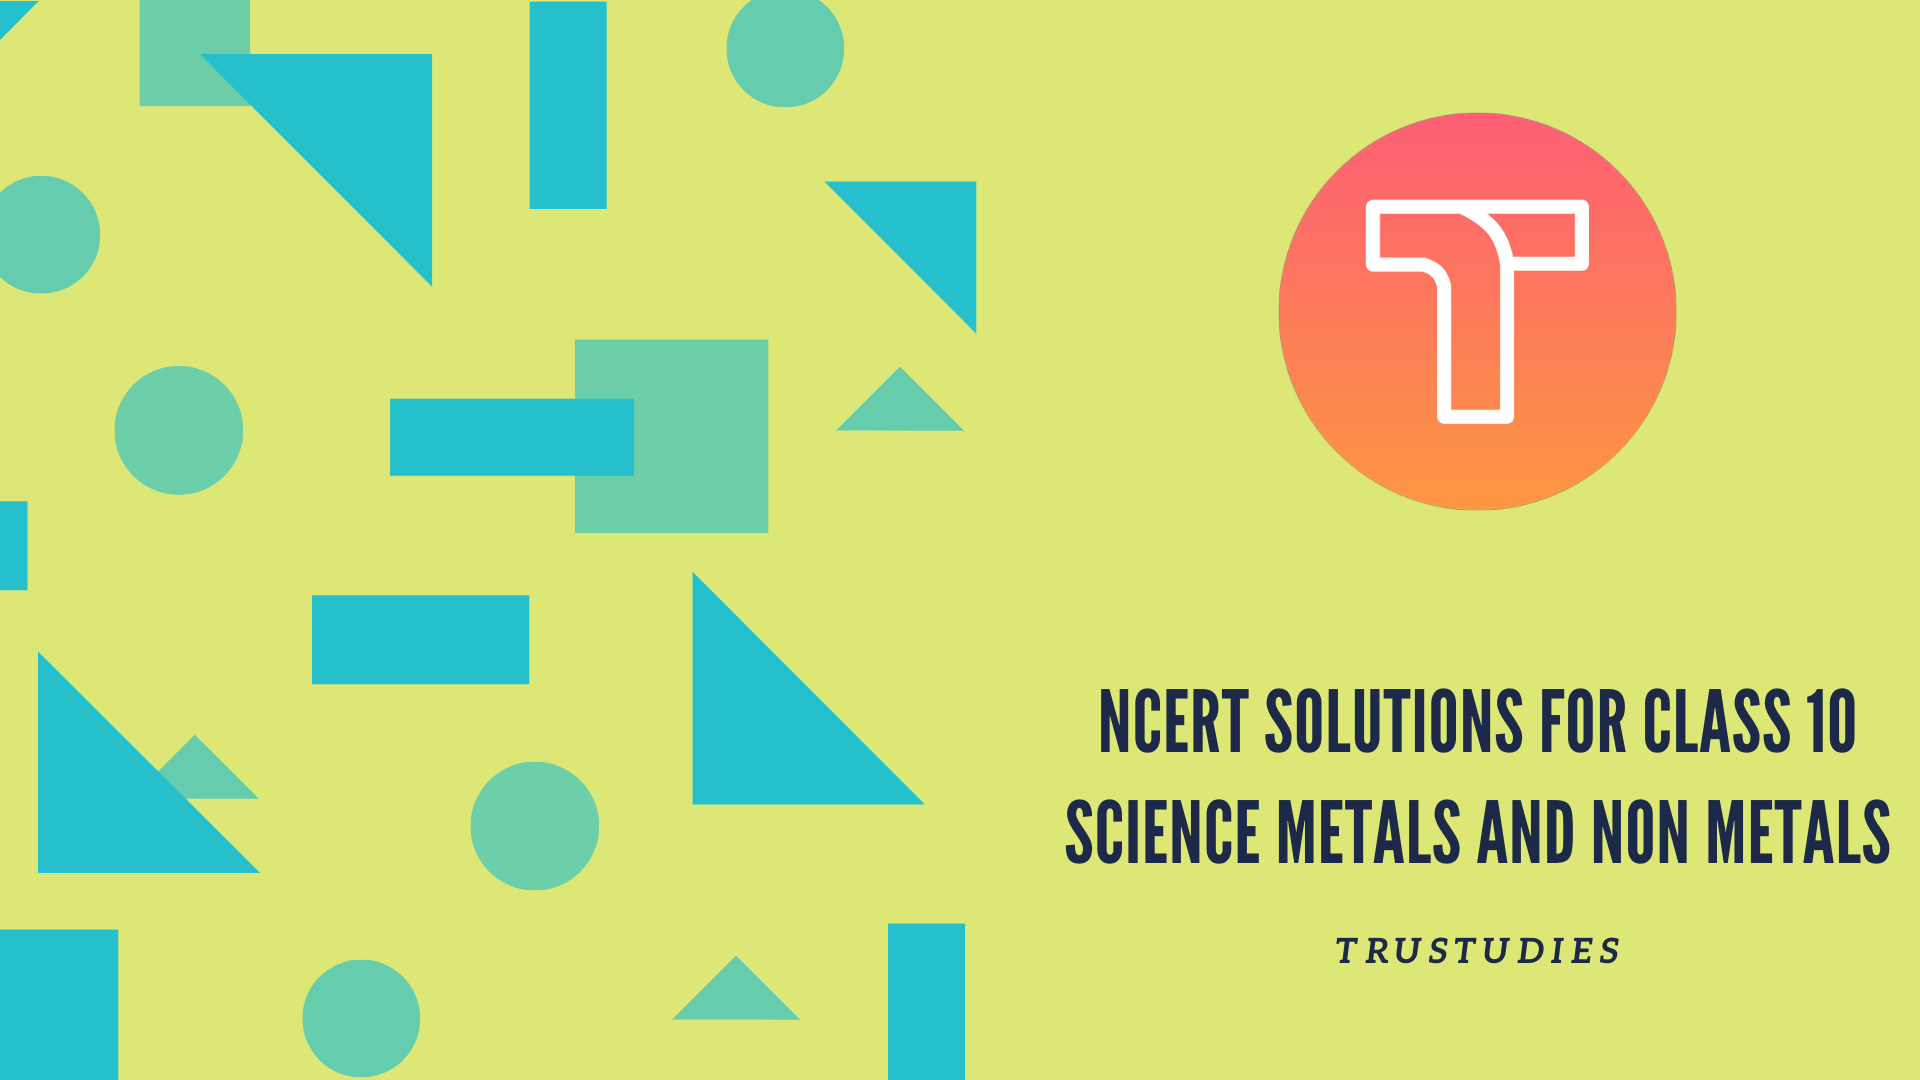 NCERT solutions for class 10 science chapter 3 metals and non metals banner image